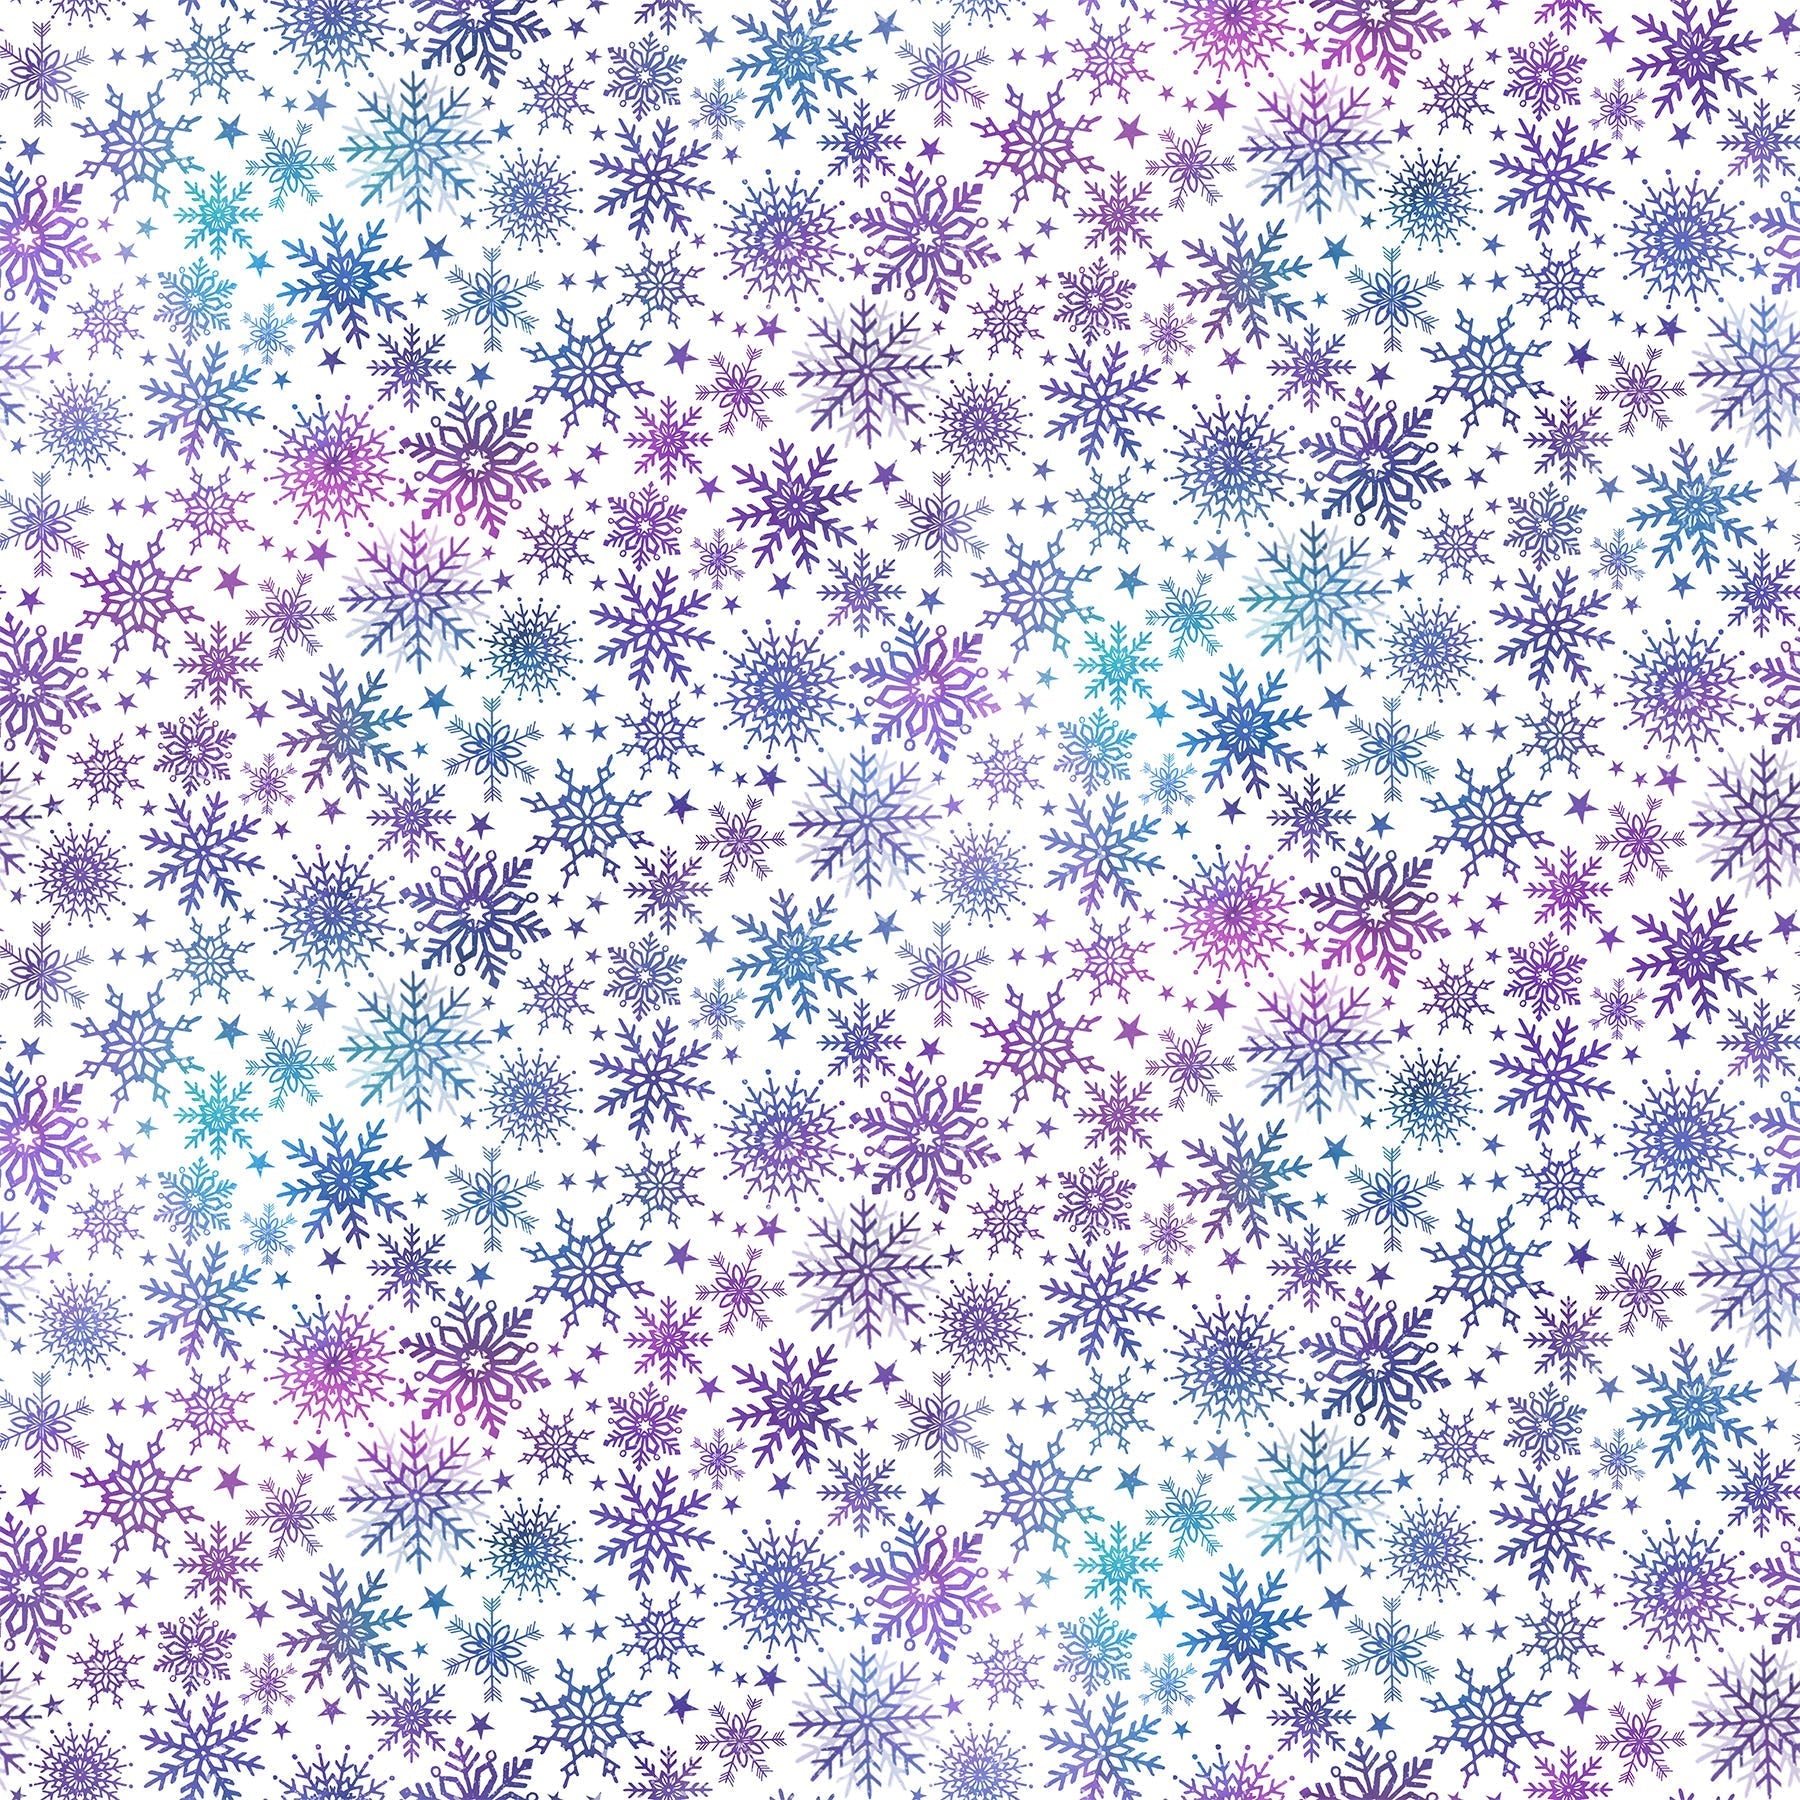 Northcott Fabric by the Yard Angels on High White Snowflakes Pigment (25361-10)